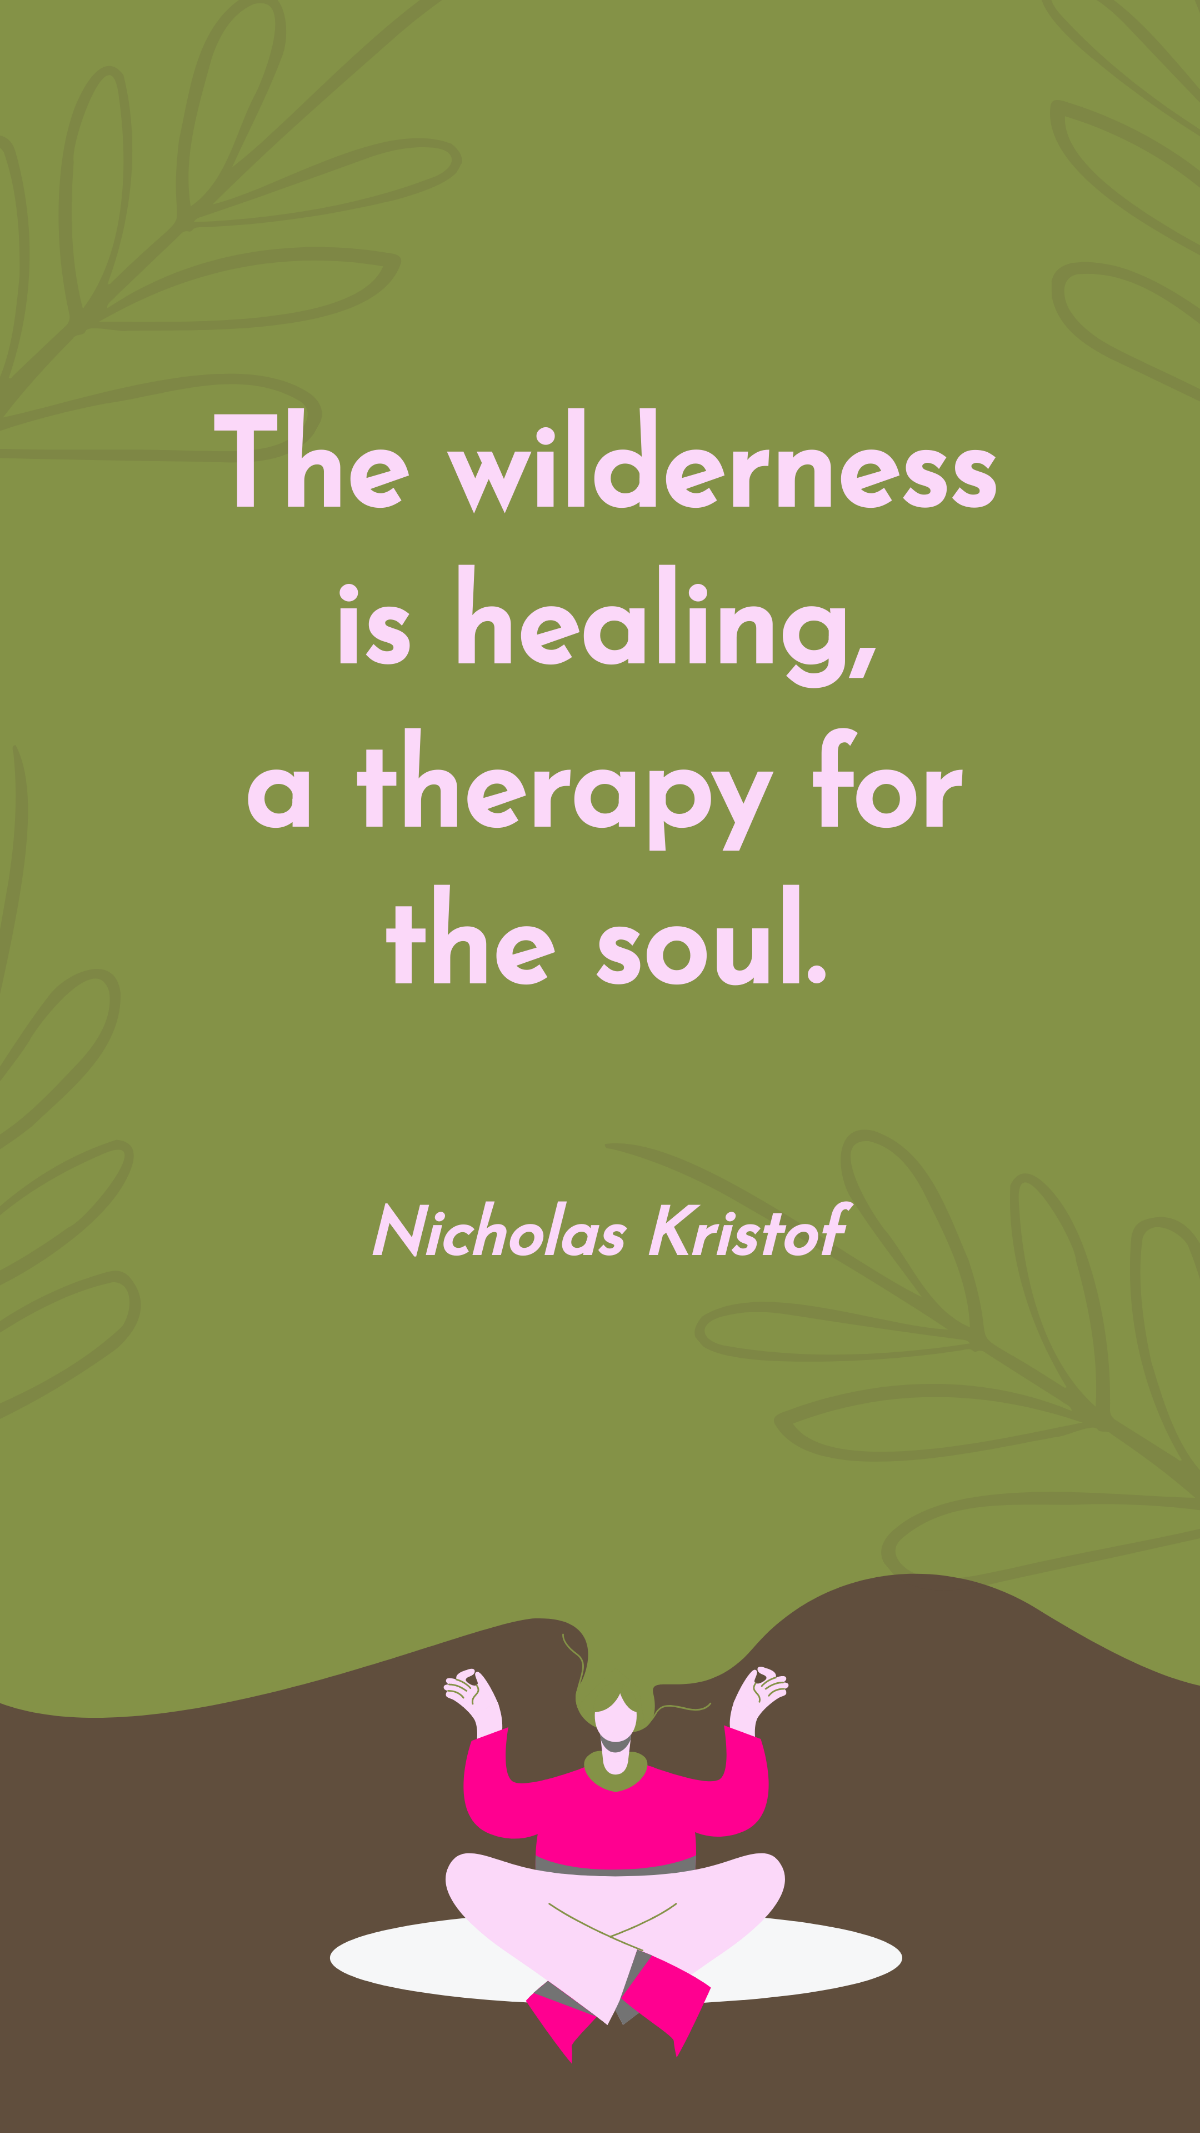 Nicholas Kristof - The wilderness is healing, a therapy for the soul. Template